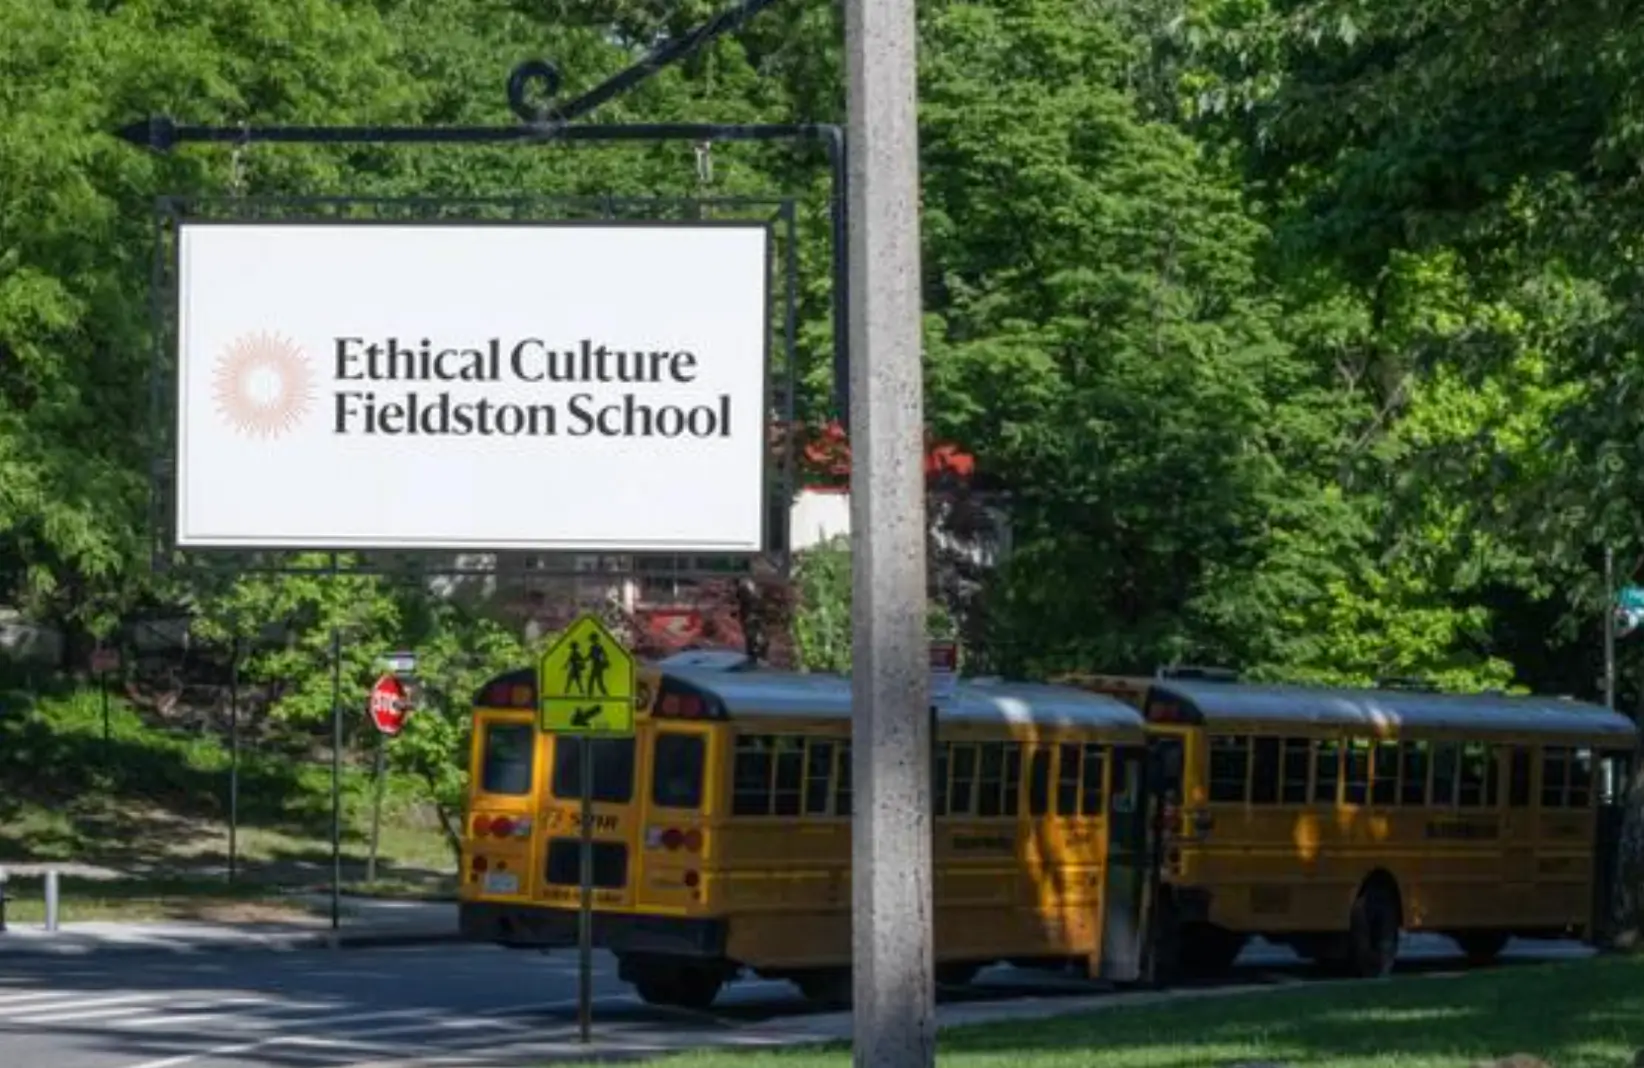 Top NYC Private School Under Fire for Anti-Semitic Incidents